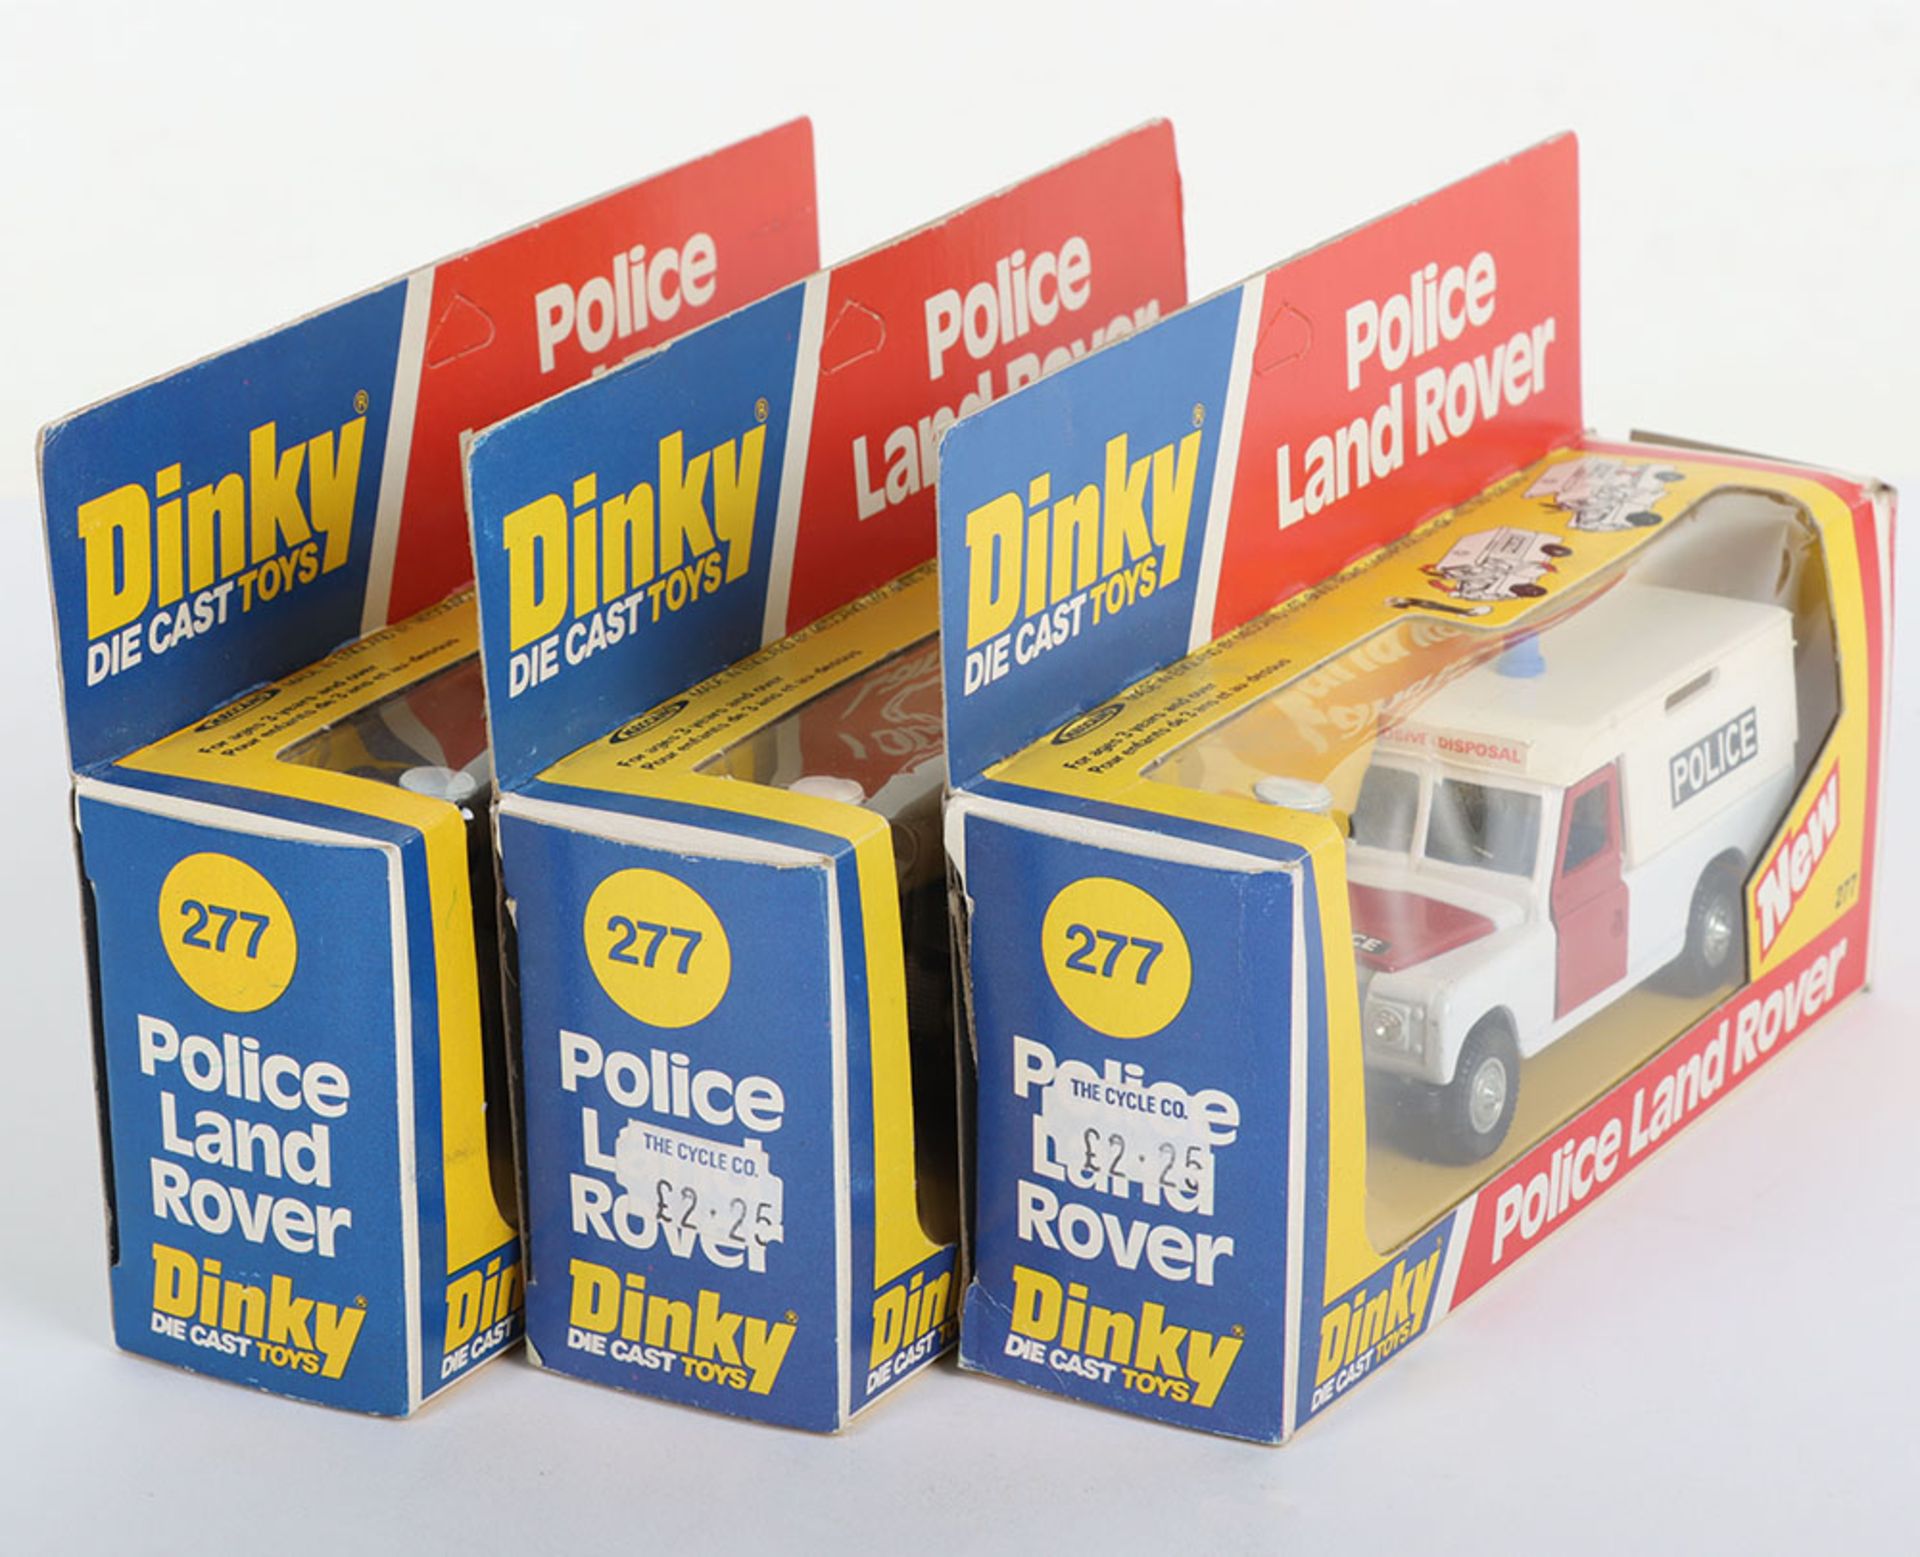 Three Dinky 277 Police Land Rovers - Image 4 of 4